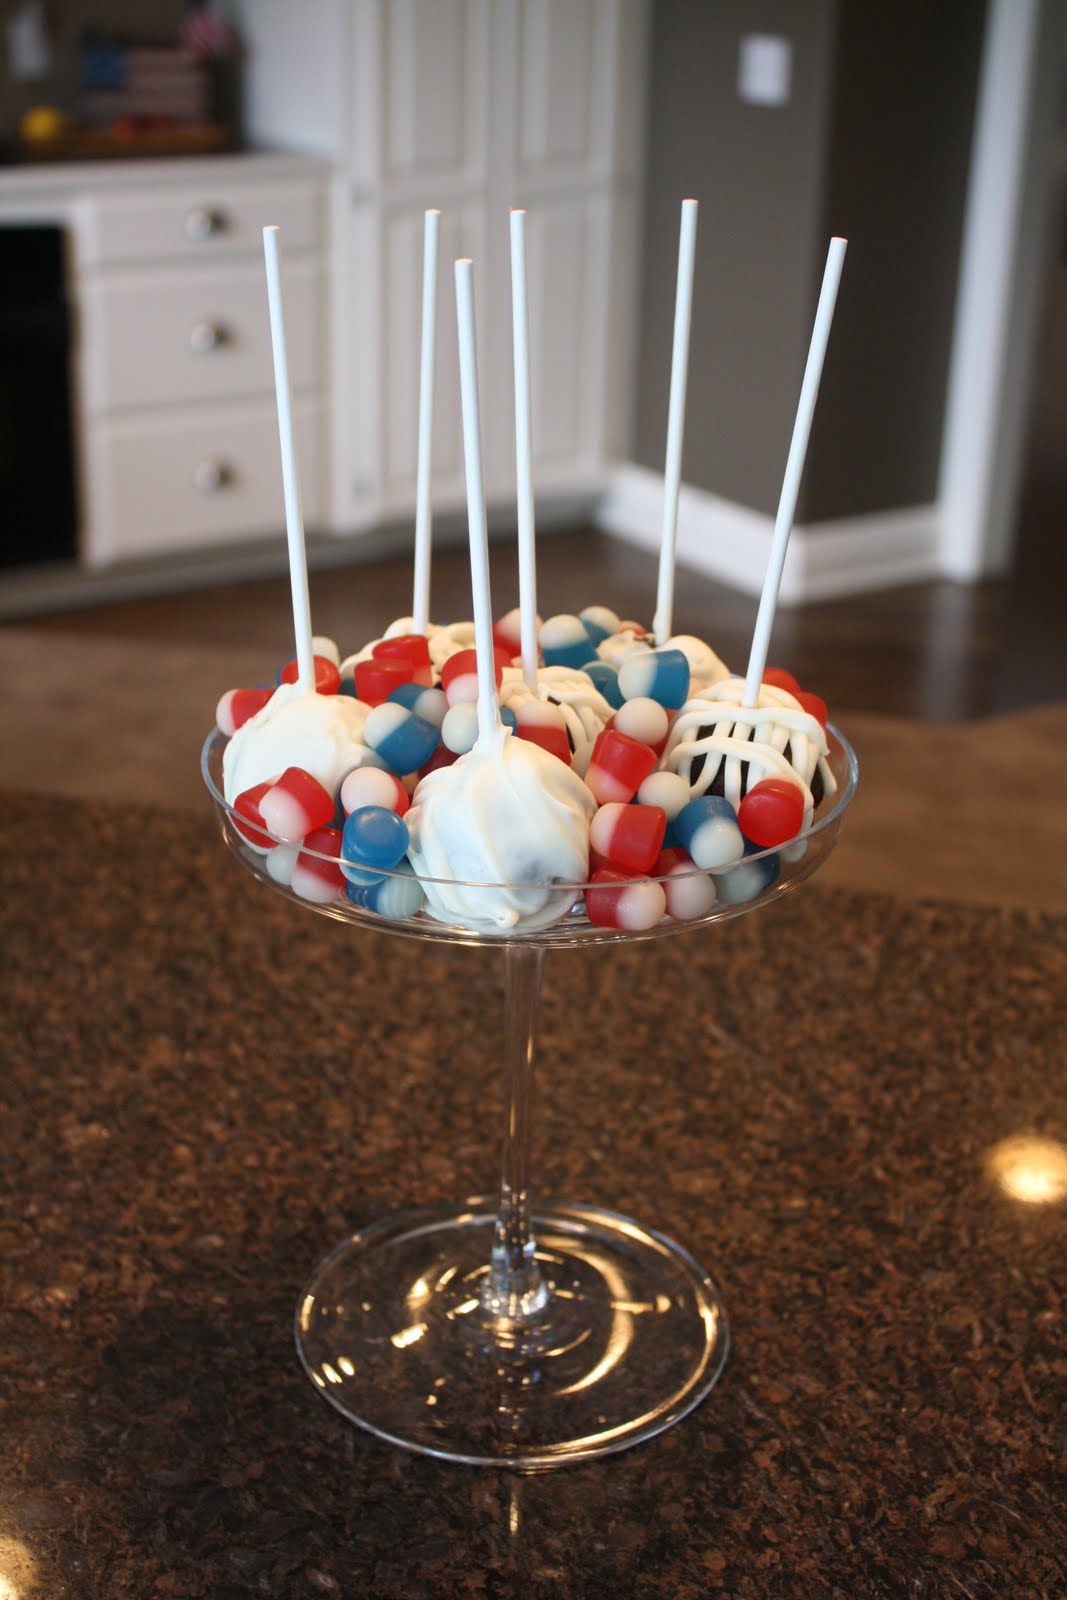 Bring on the 4th of July Fun with Cake Pops!